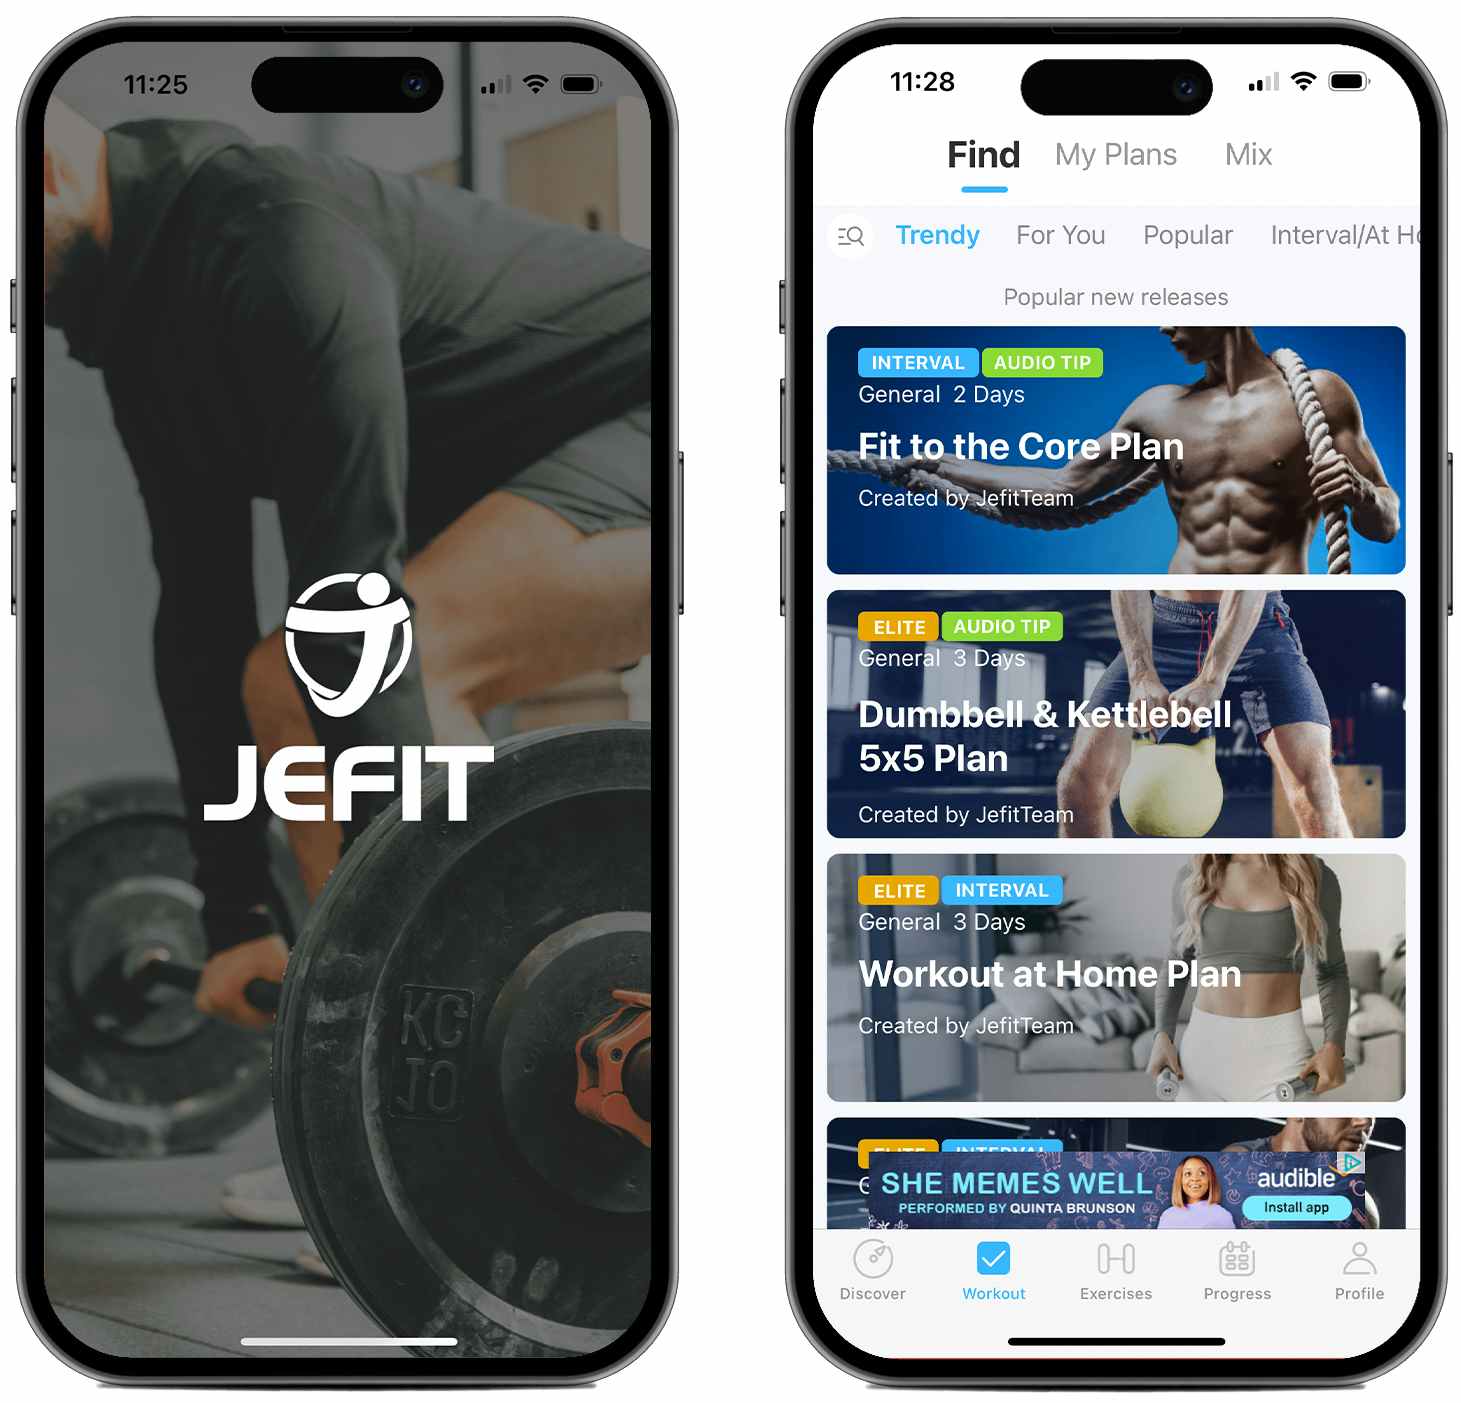 Screenshots from the Jefit fitness app on two iPhone screens